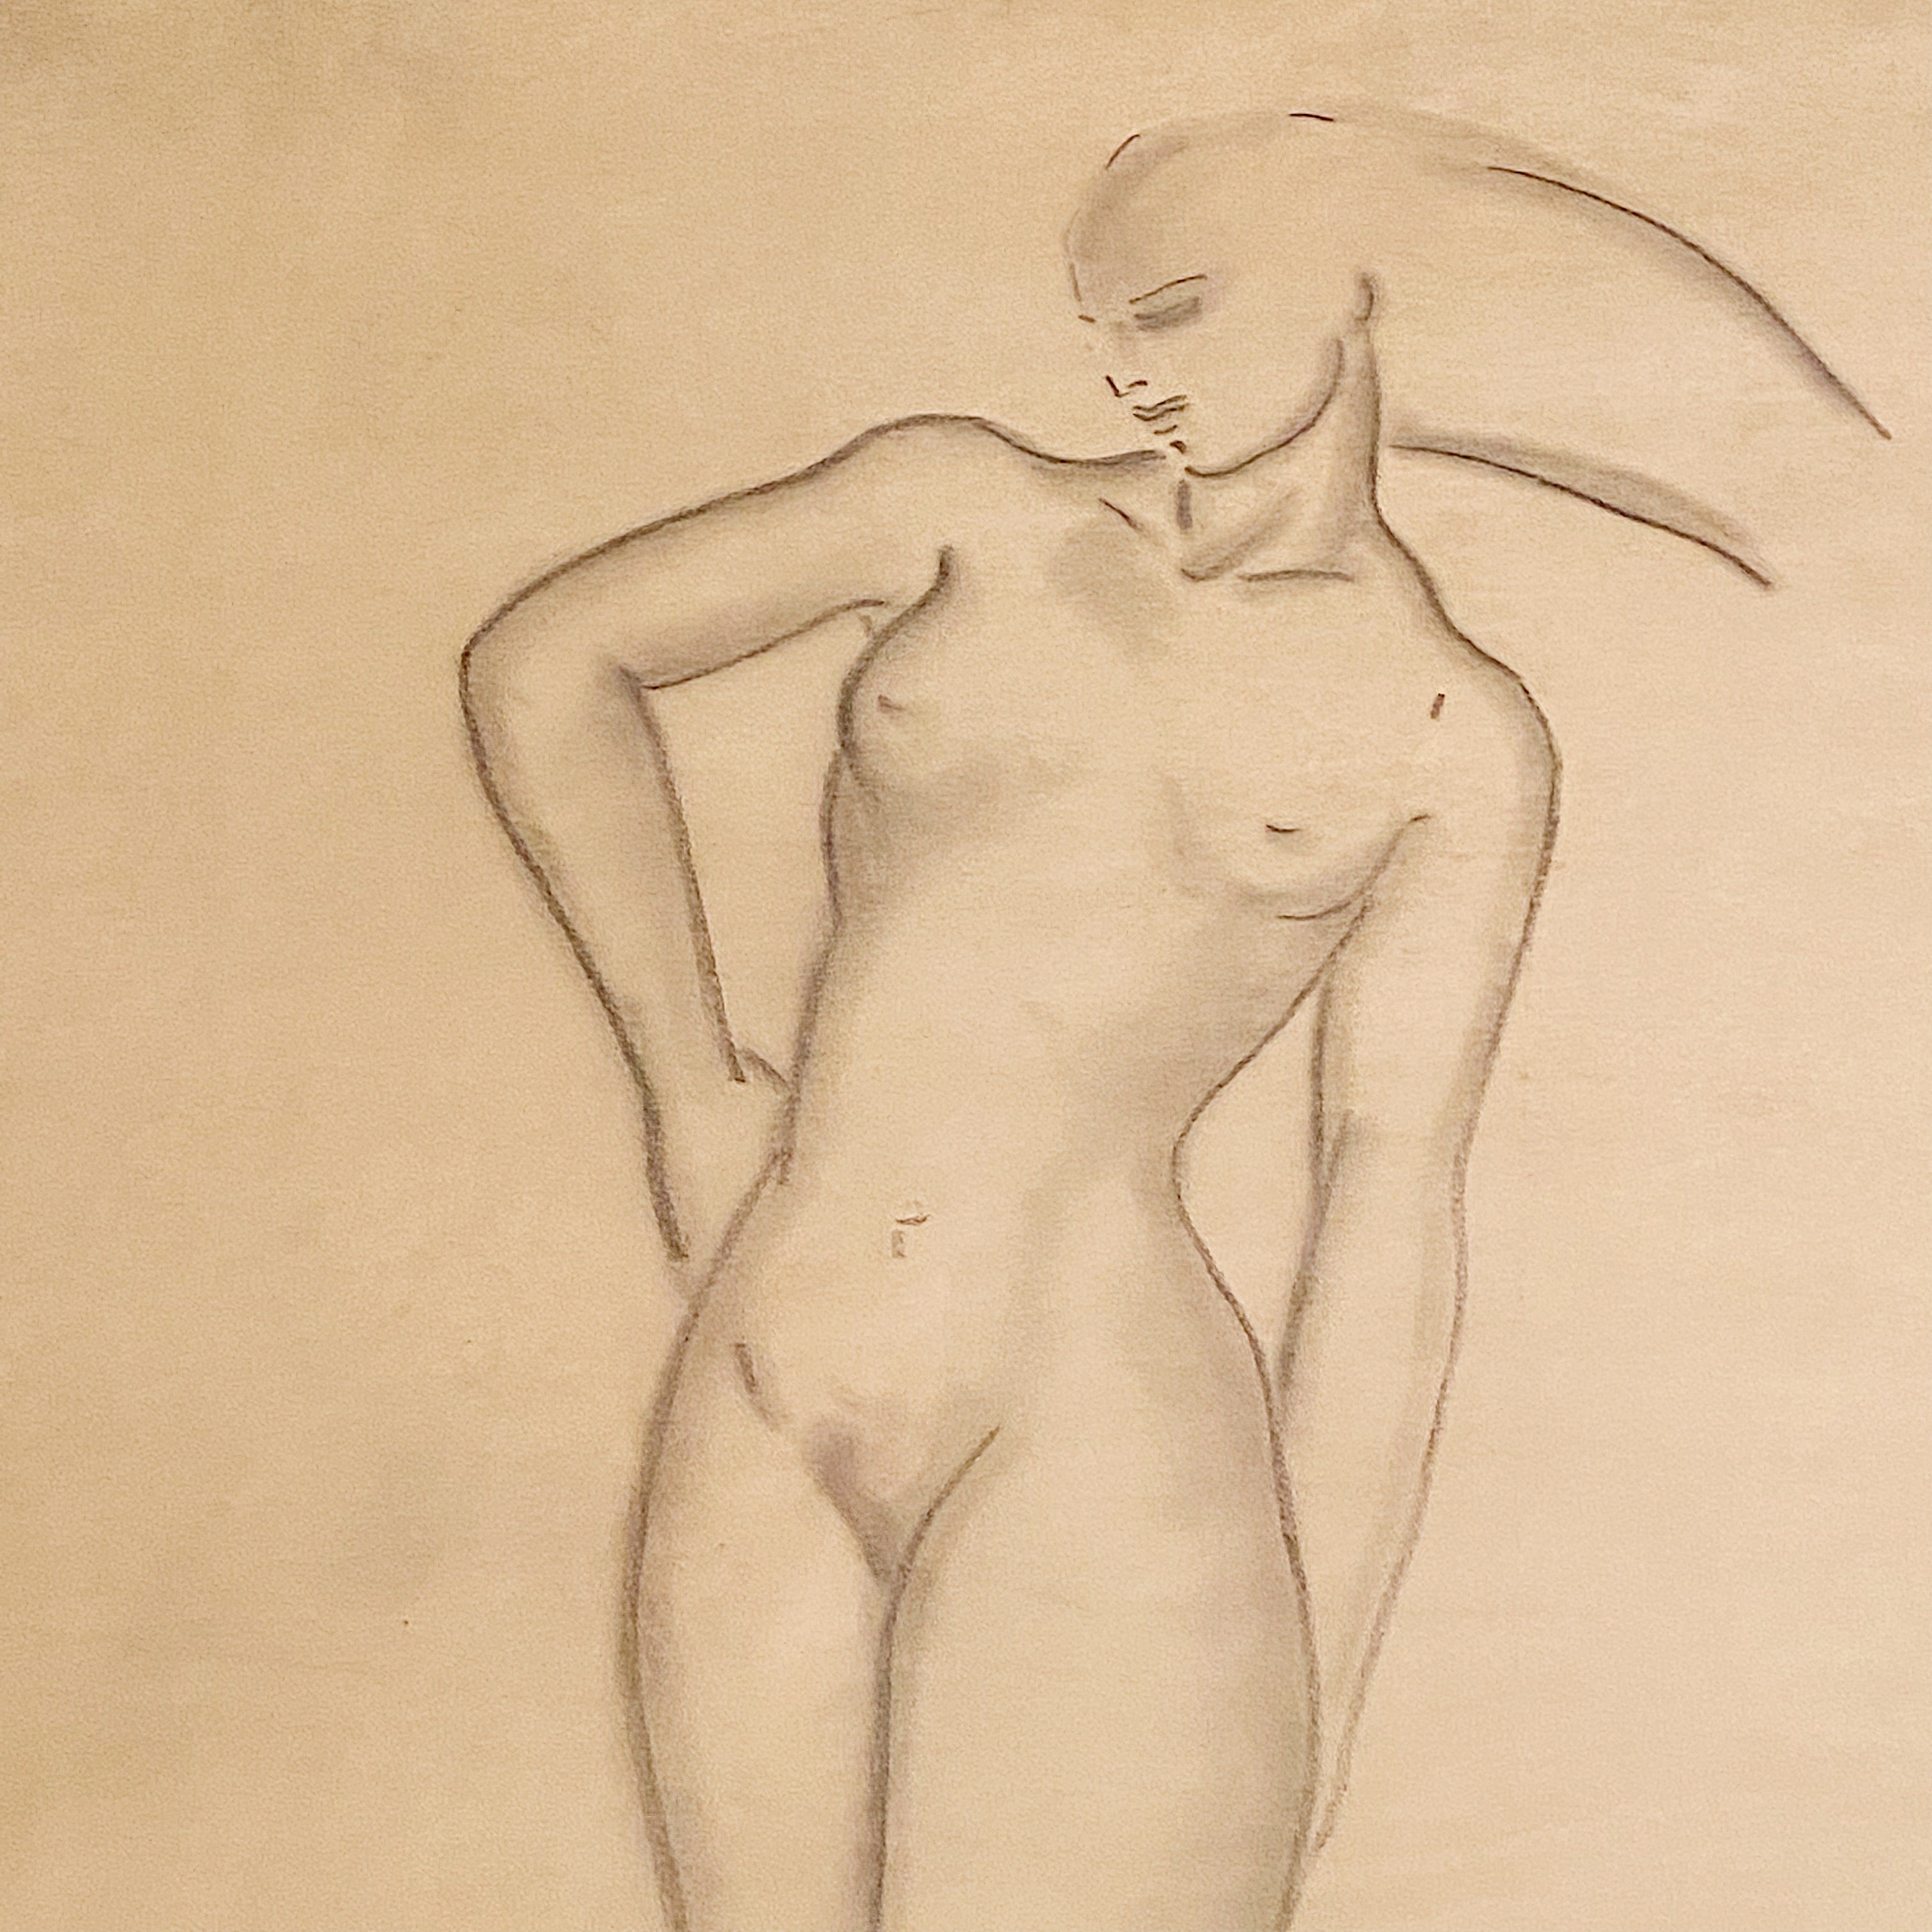 WPA Era Nude Drawing of Woman - Rare 1940s Modernist Art - Signed by Mystery Artist - WW2 Era Drawings - Women's Rights - Vintage Nudes